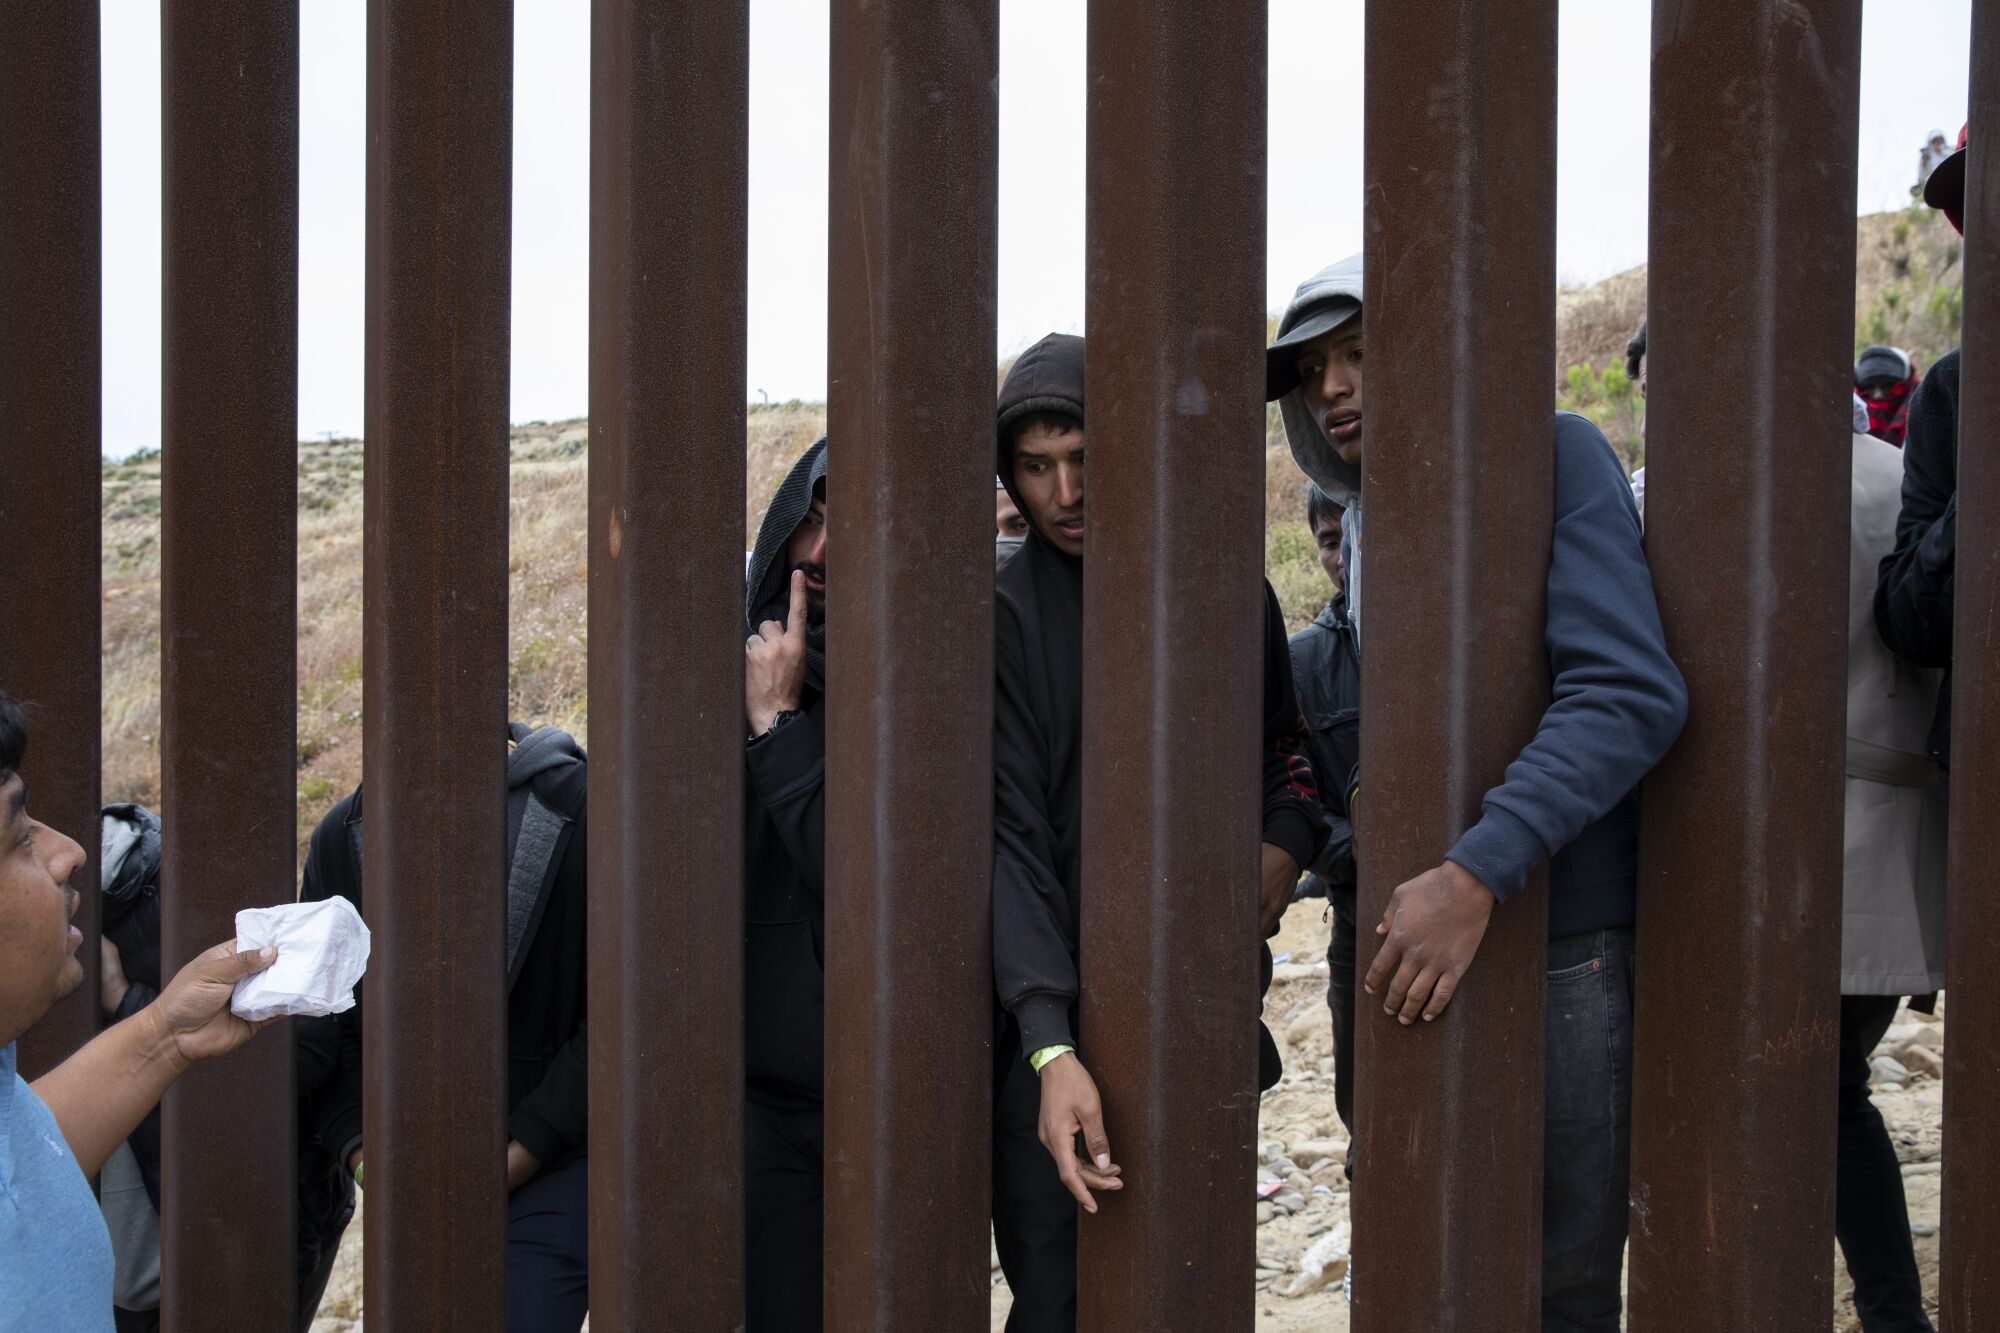 A group of men buy food and phone chargers as they wait between the border walls that separate Tijuana from San Diego.